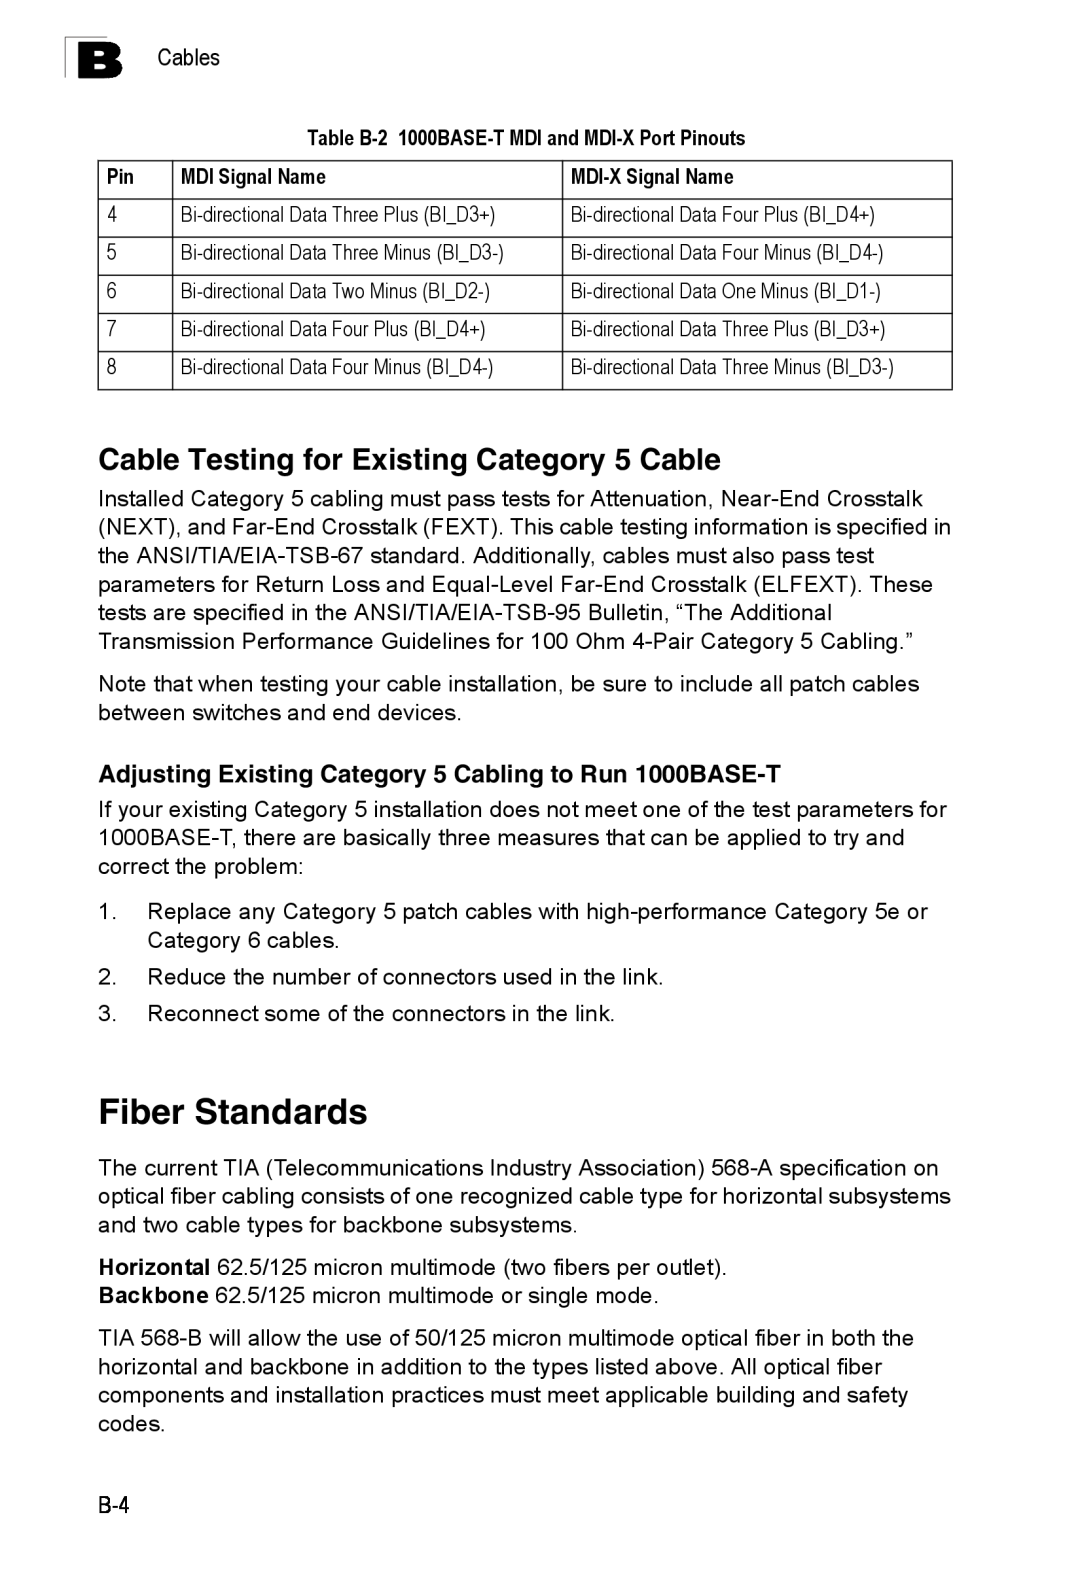 Accton Technology ES4324 manual Fiber Standards, Cable Testing for Existing Category 5 Cable 